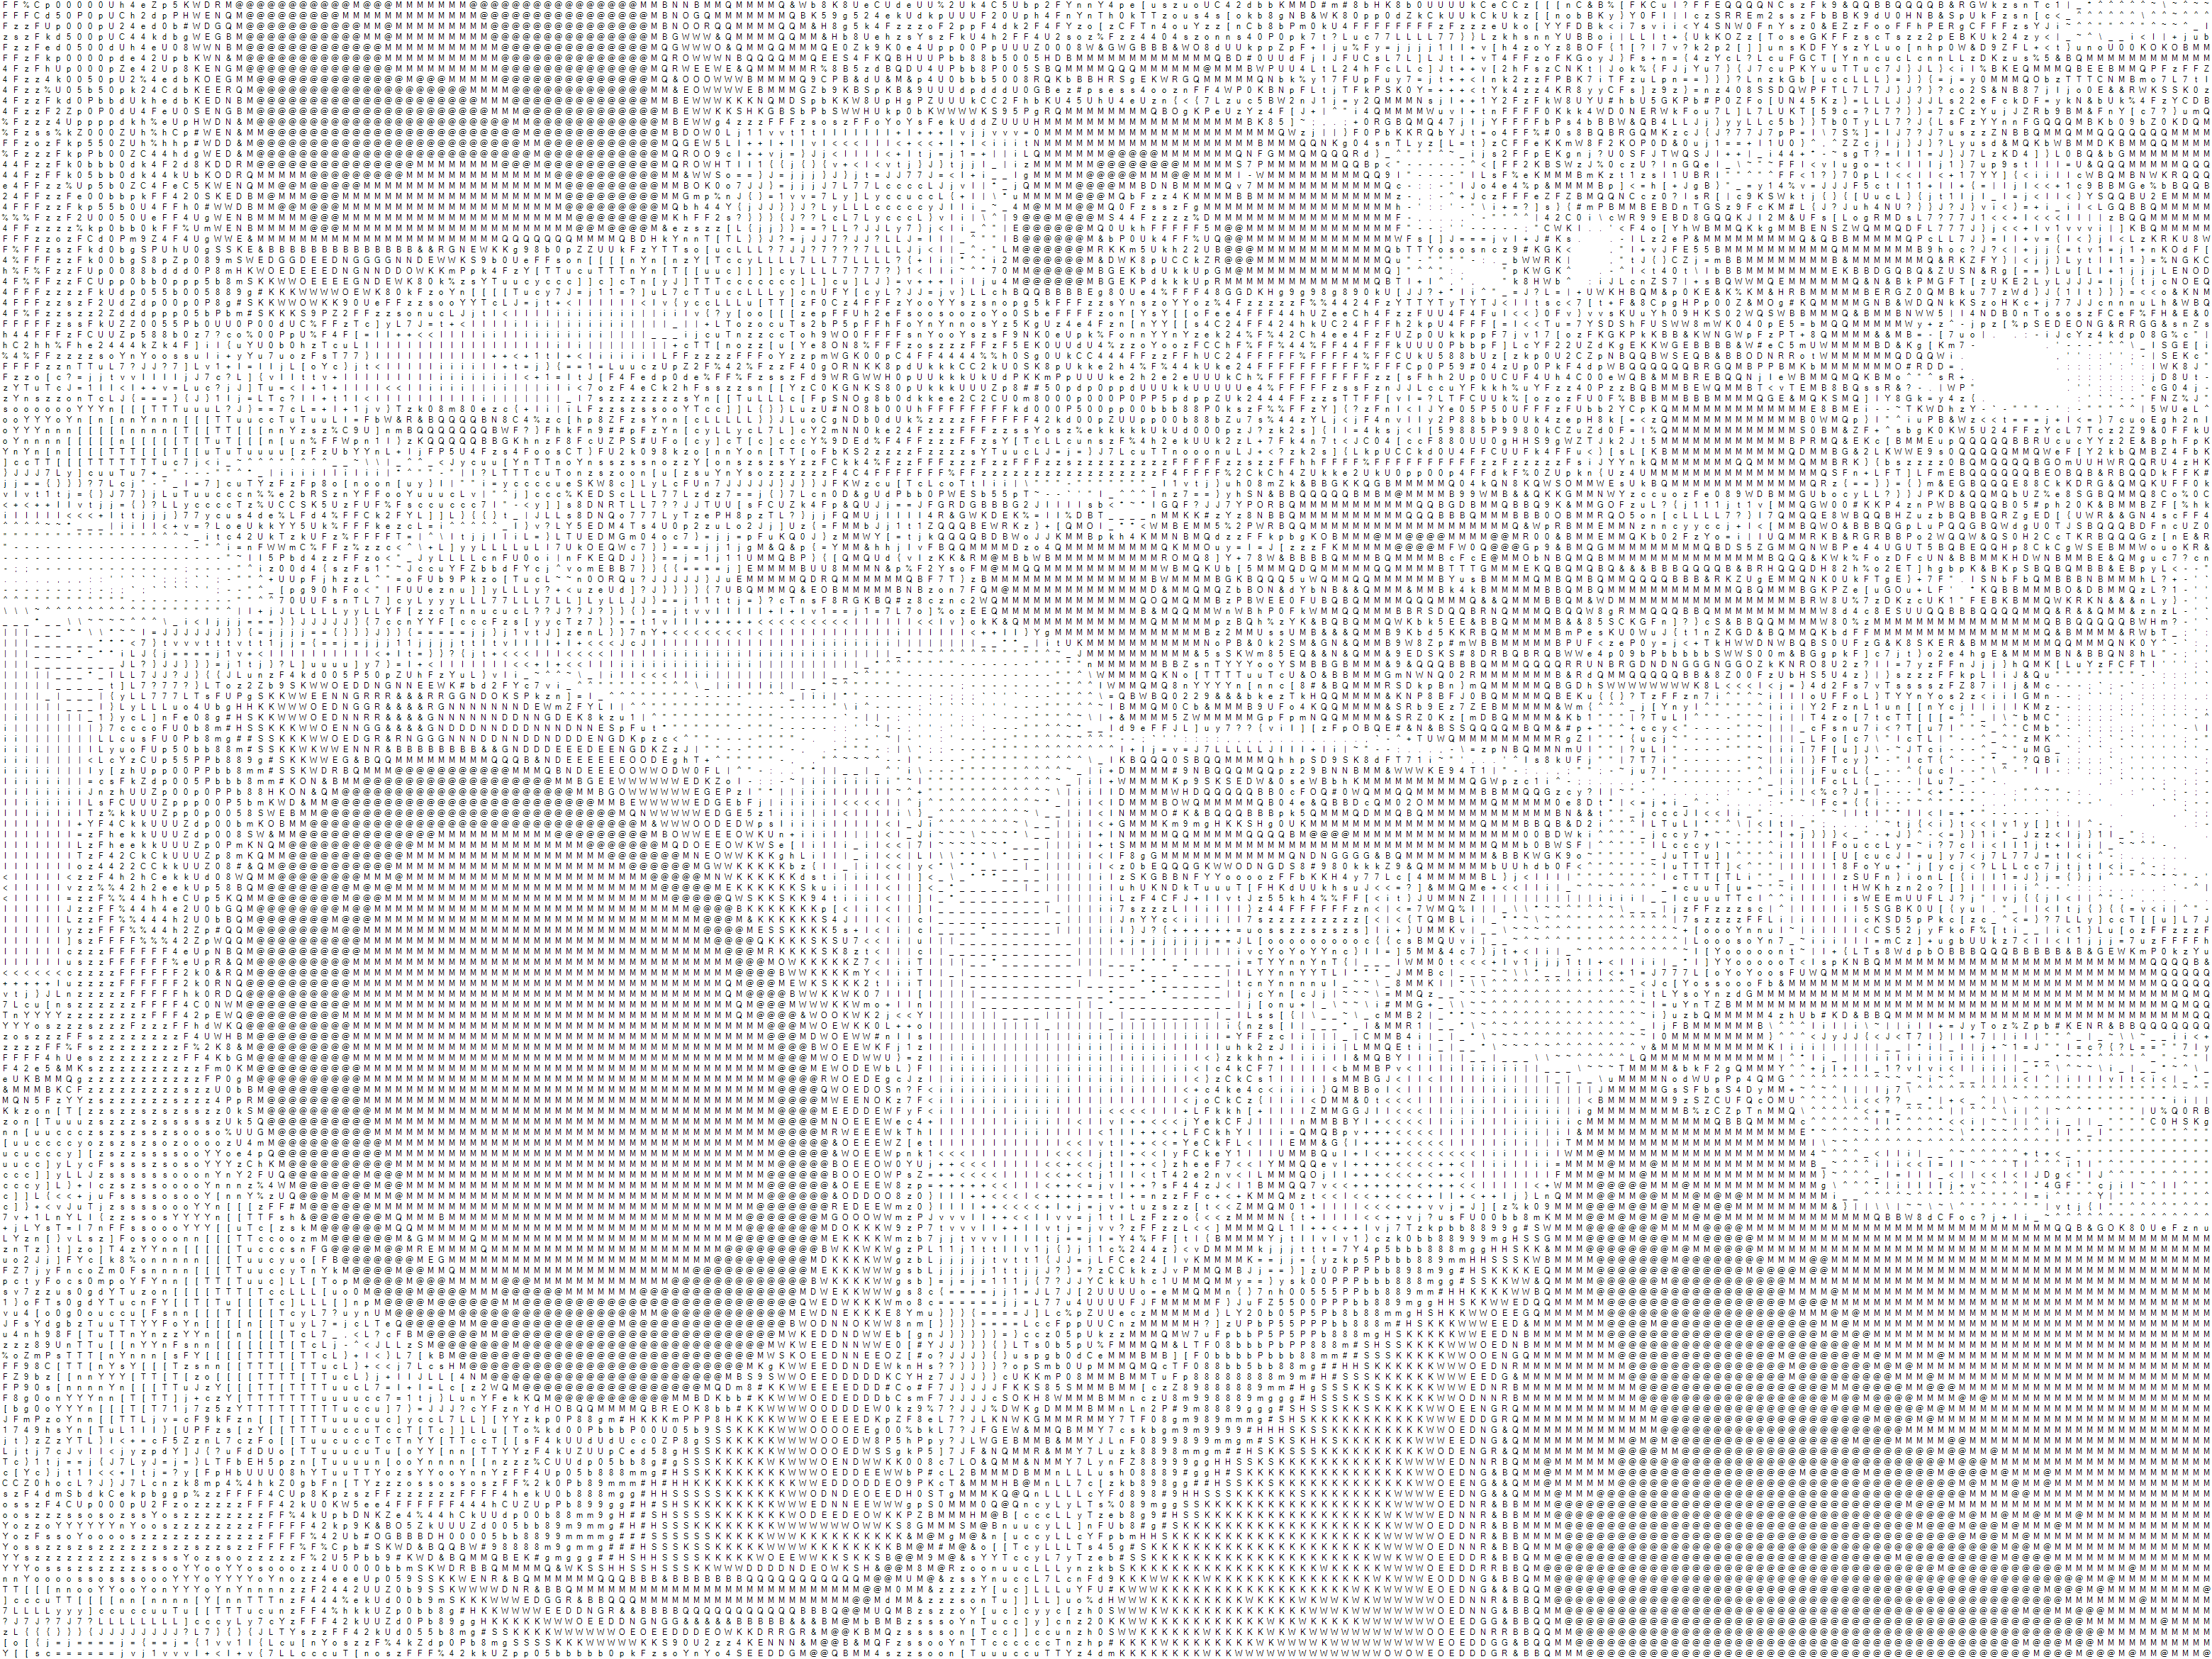 Translate from EBCDIC codes to ASCII.